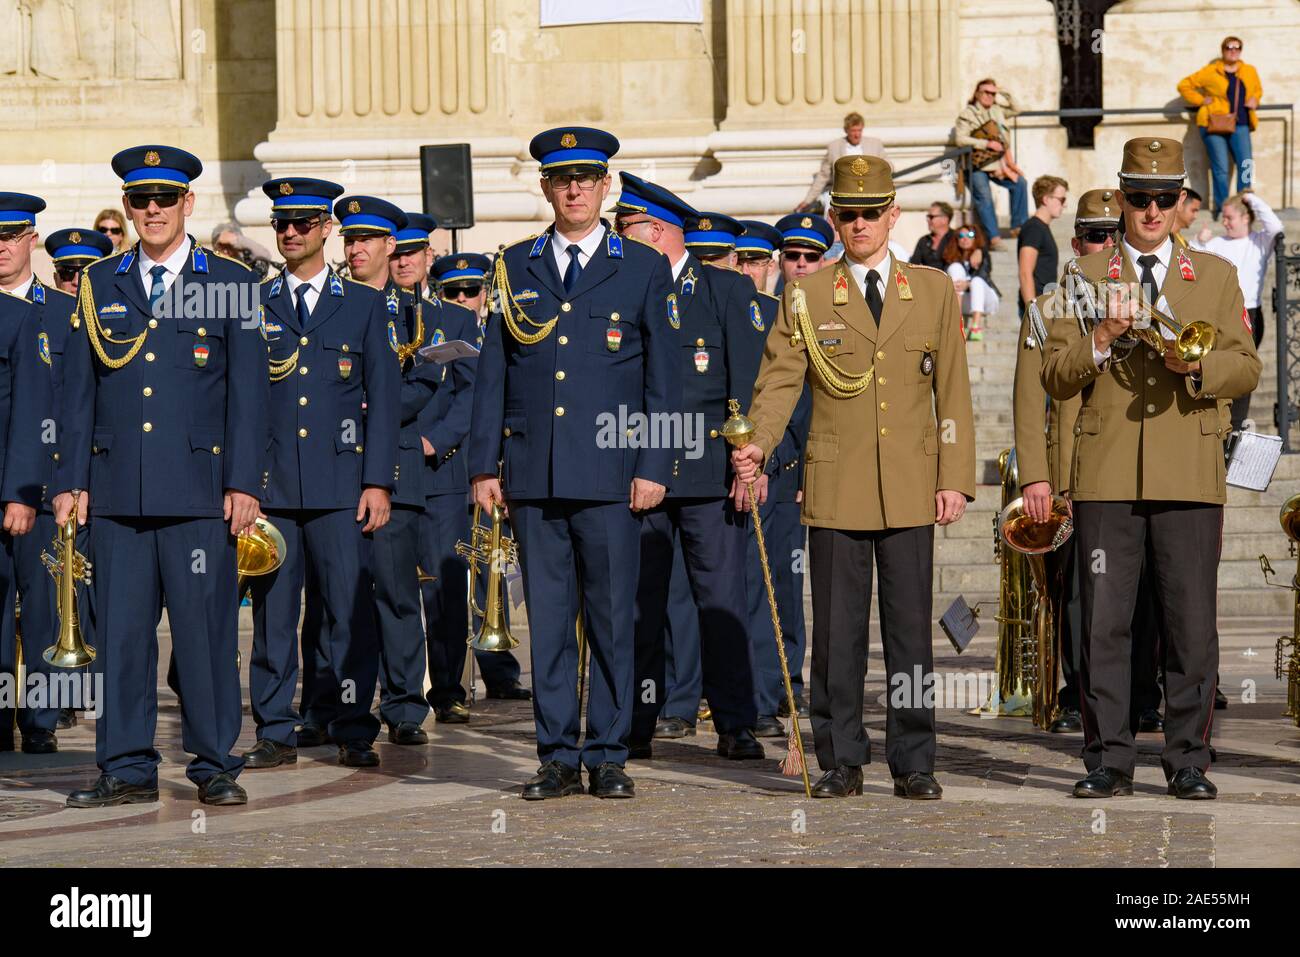 Music performance by Hungarian military band in front of St. Stephen's Basilica in Budapest, Hungary Stock Photo